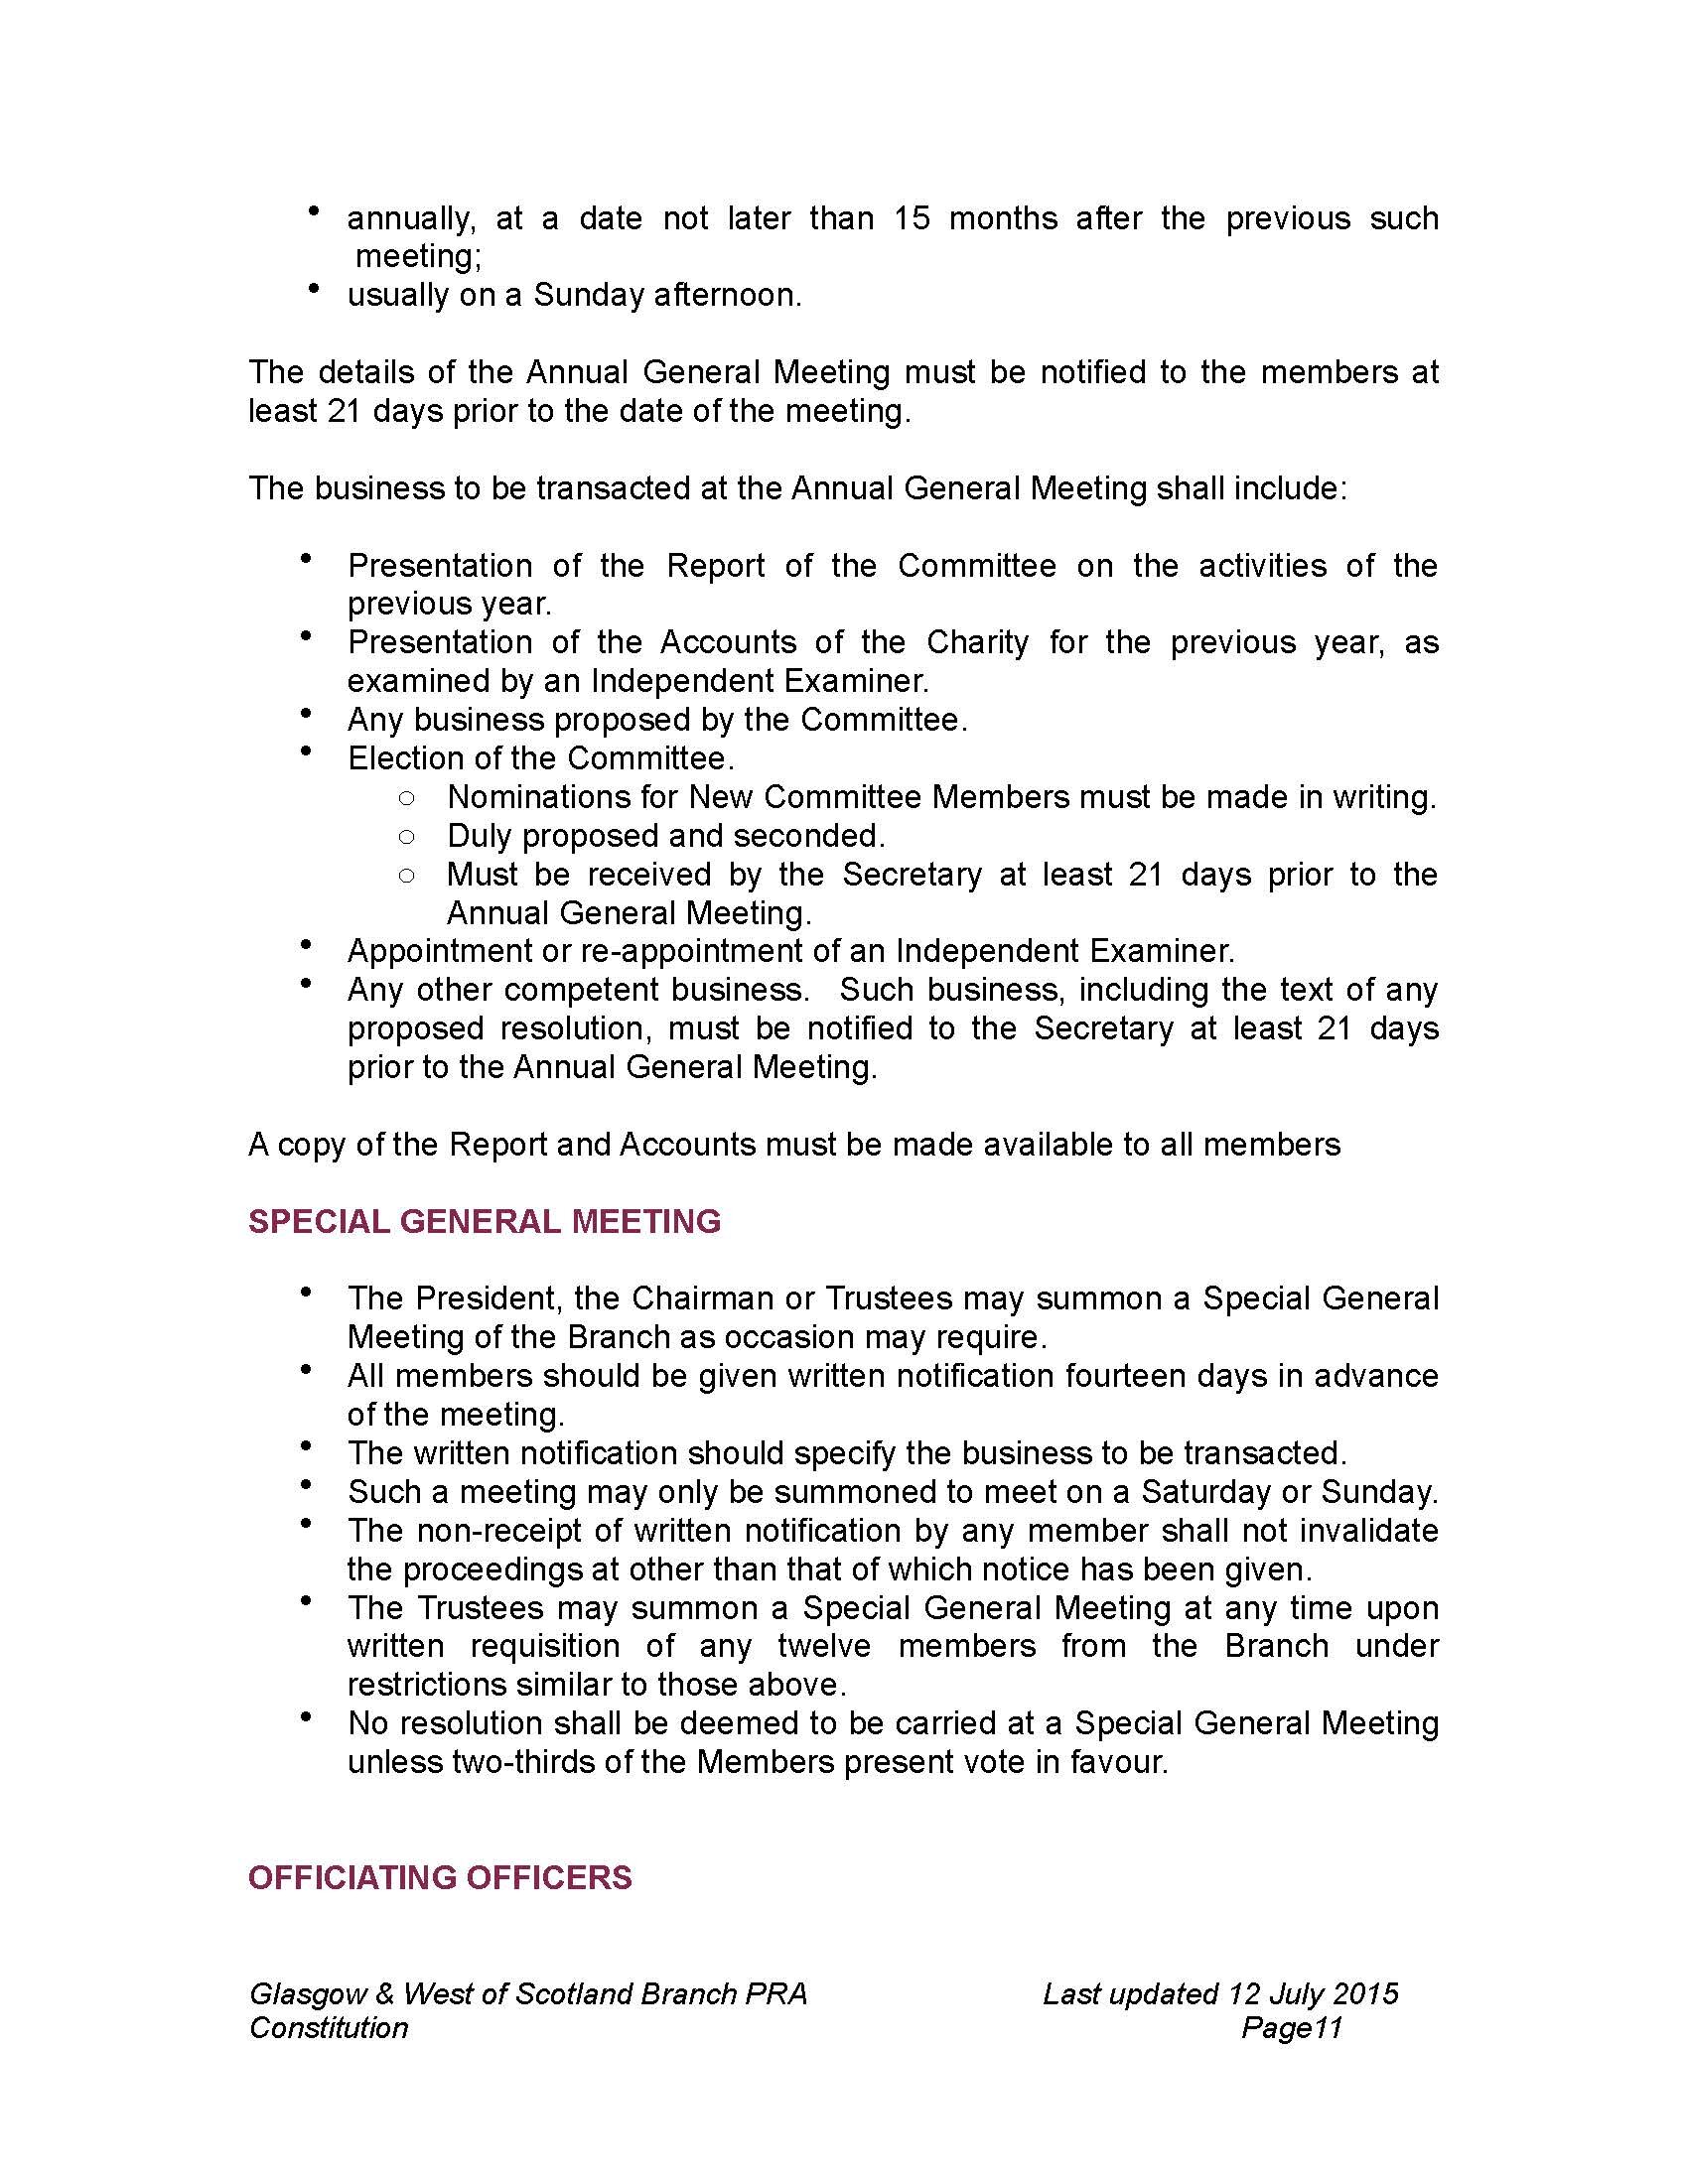 The Constitution of Glasgow & West  of Scotland Branch PRA July  2015_Page_08.jpg